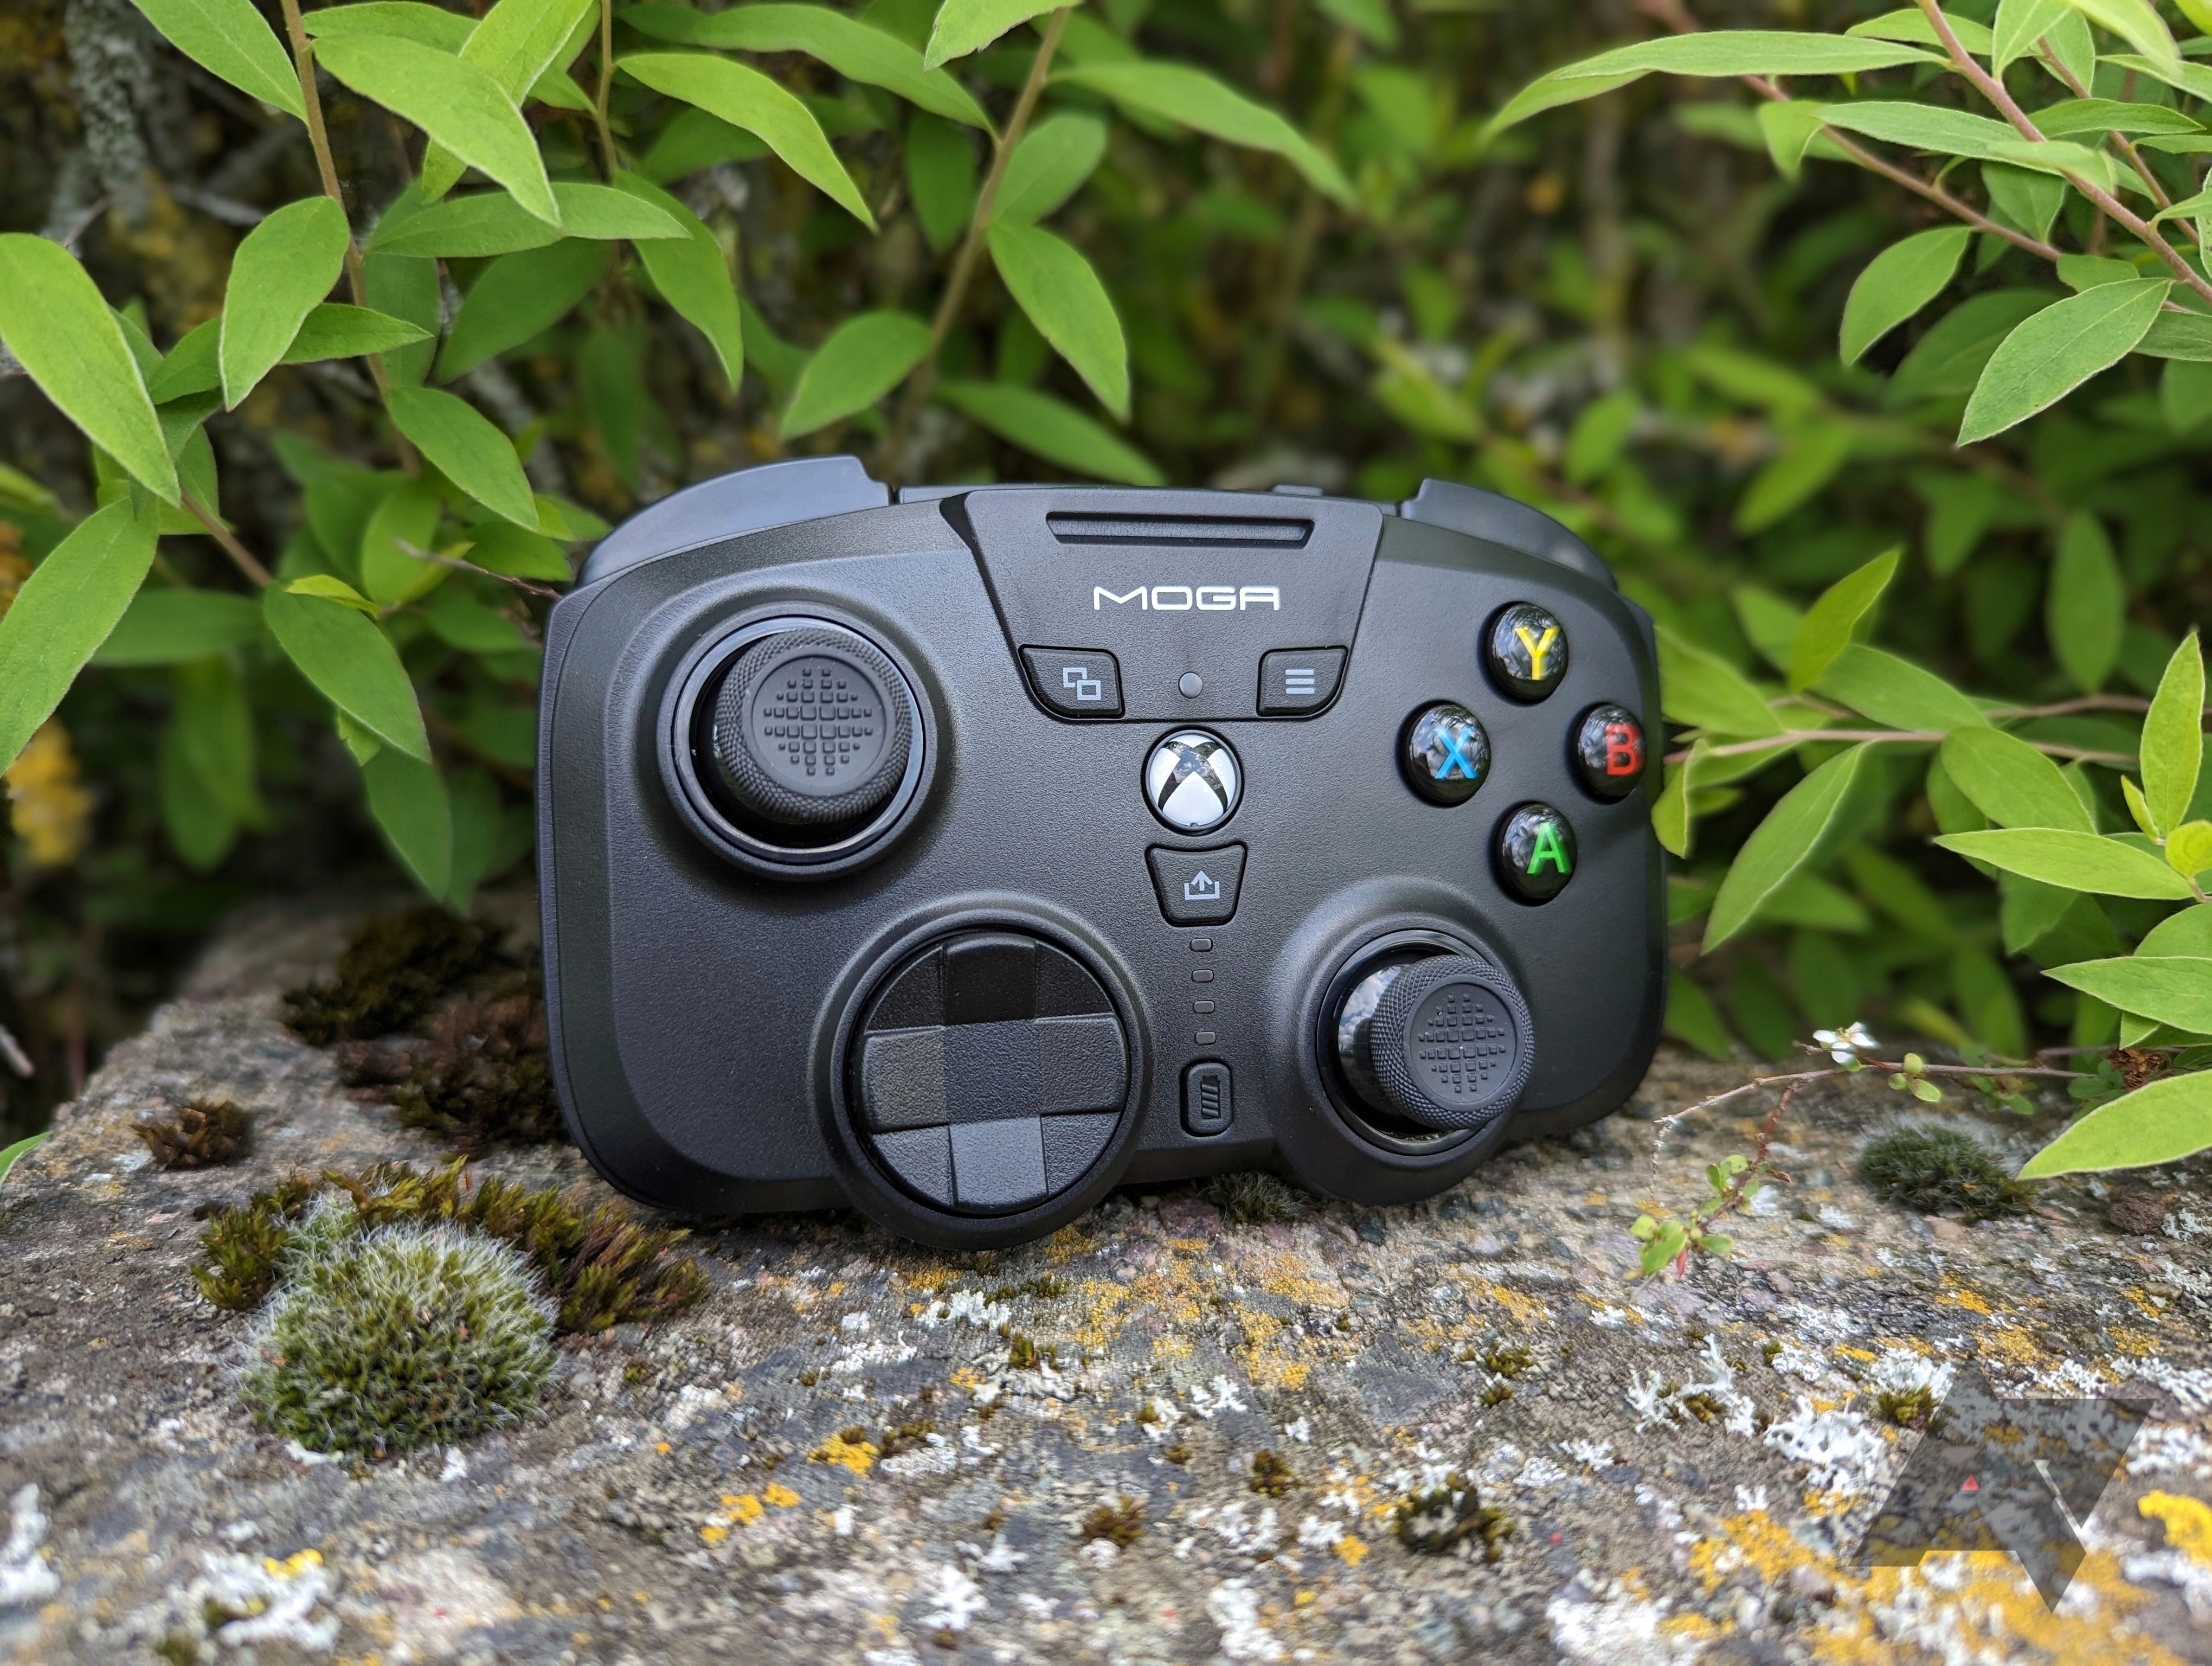 game controller sitting on rocks in front of leaves